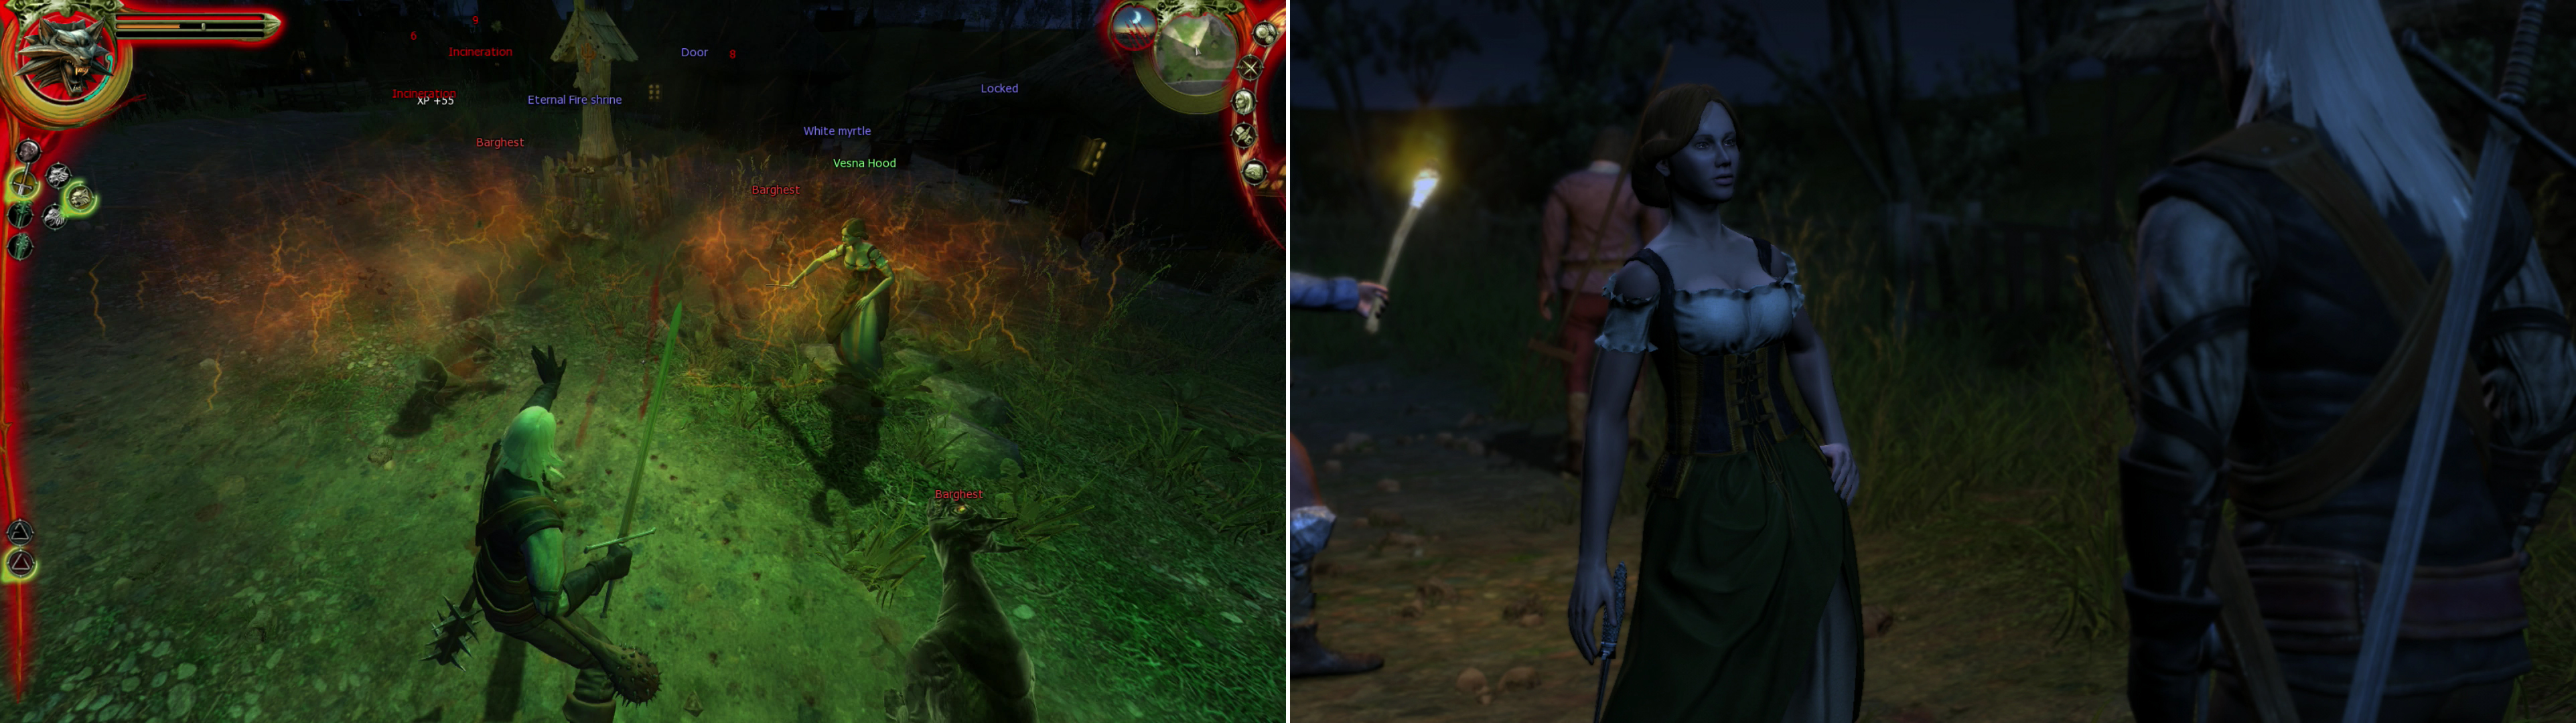 Her humanoid assailants might be dead, but walking around the Outskirts at night isn't exactly safe (left). Do the gentlemanly thing and escort Vesna home-after all, aren't Witcher supposed to protect people from monsters? Asking for a date afterwards, however, is optional (right).